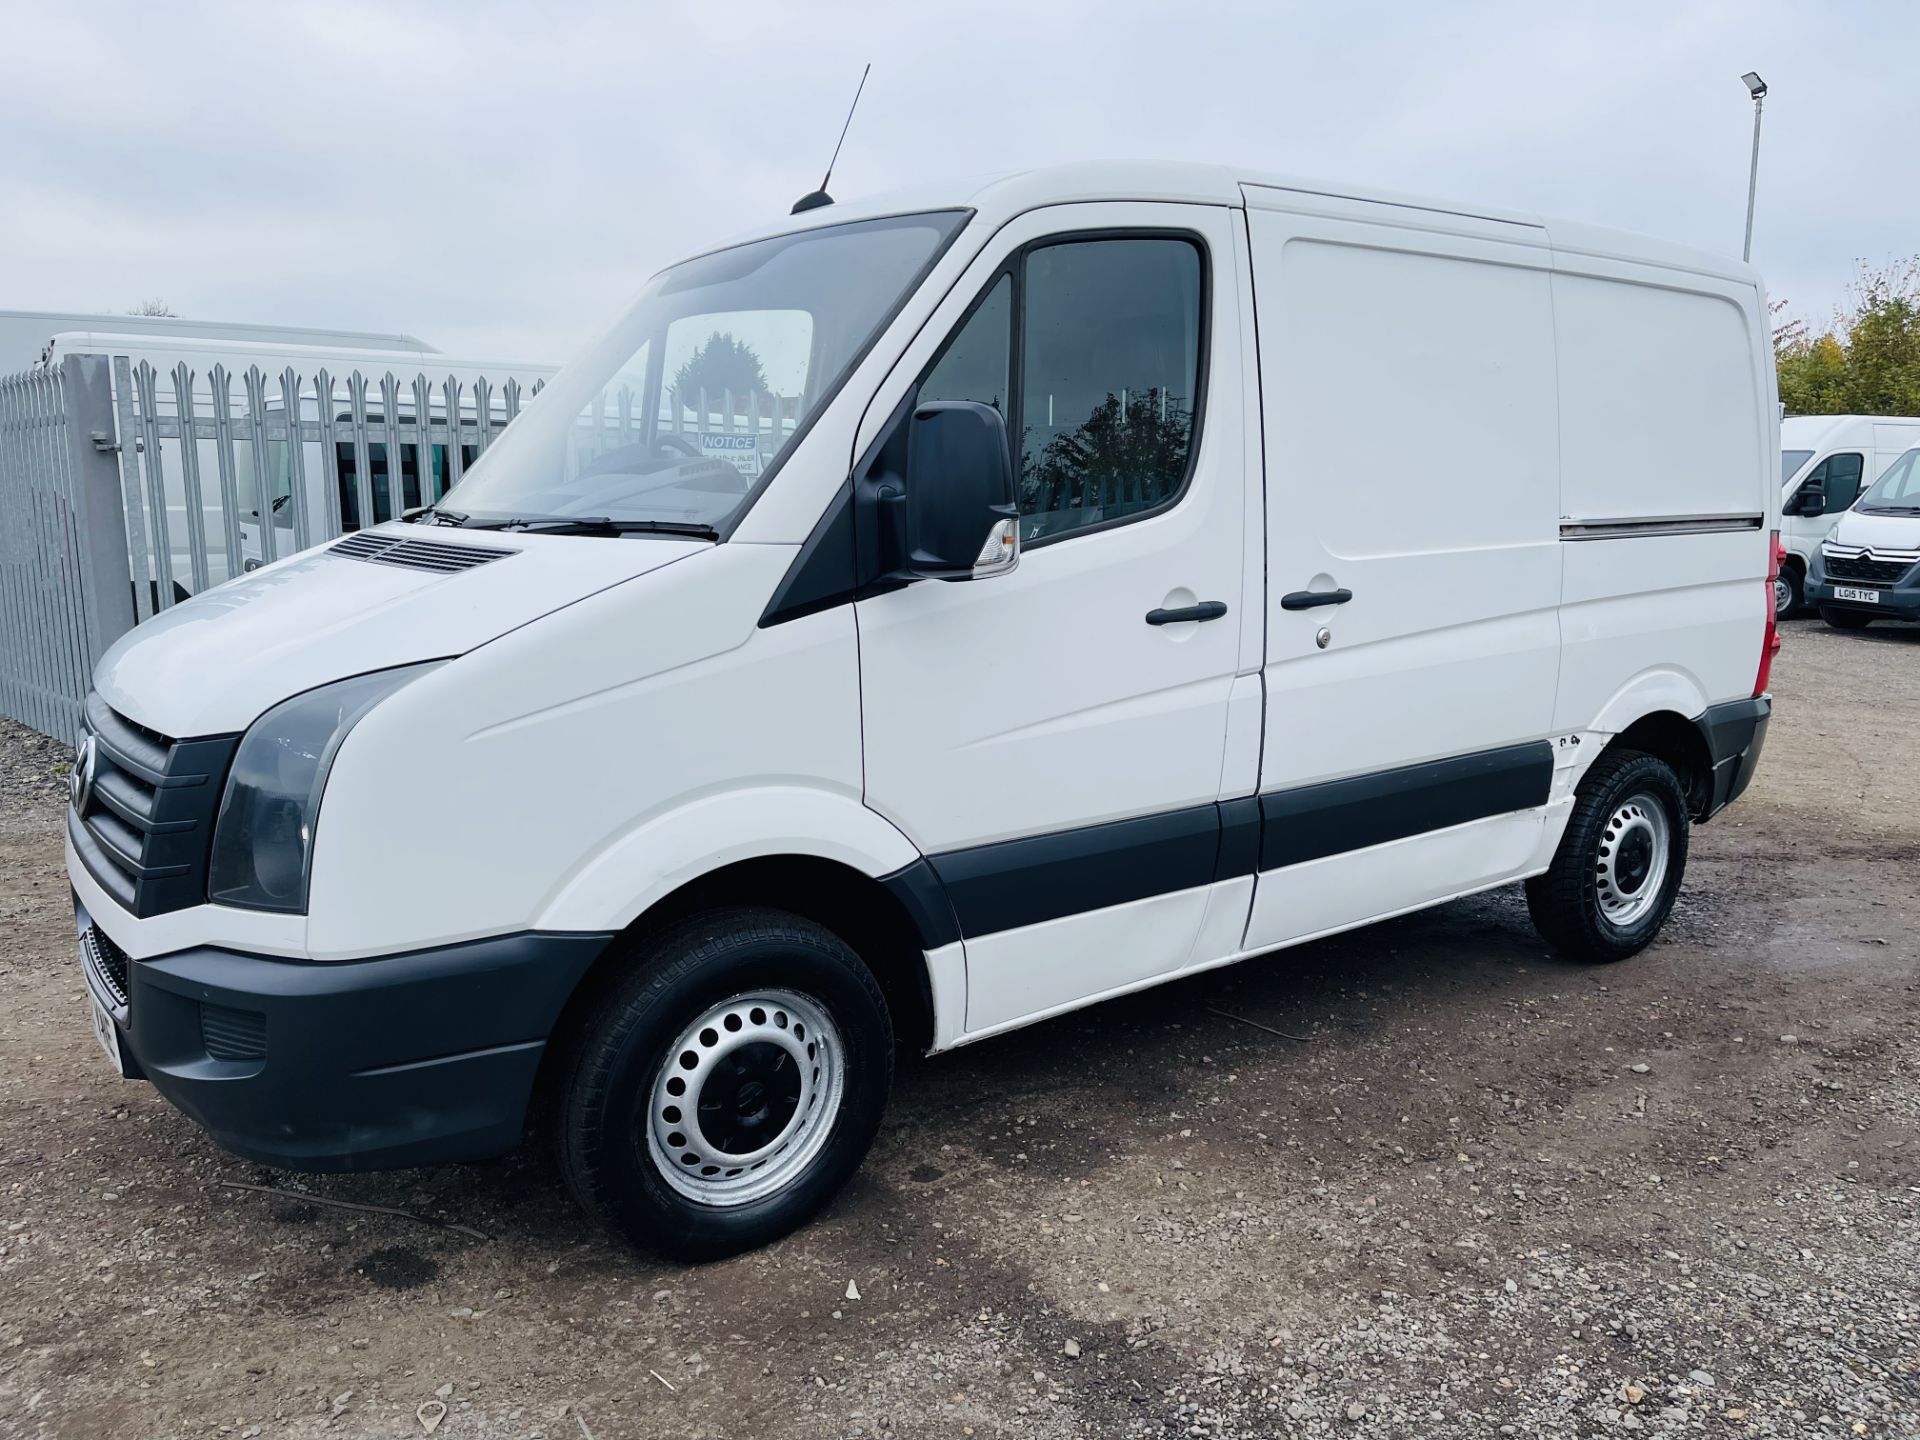 Volkswagen Crafter CR30 2.0 TDI 109 L1 H1 2012 ' 62 Reg' - Air Con - No Vat Save 20% - Image 6 of 19